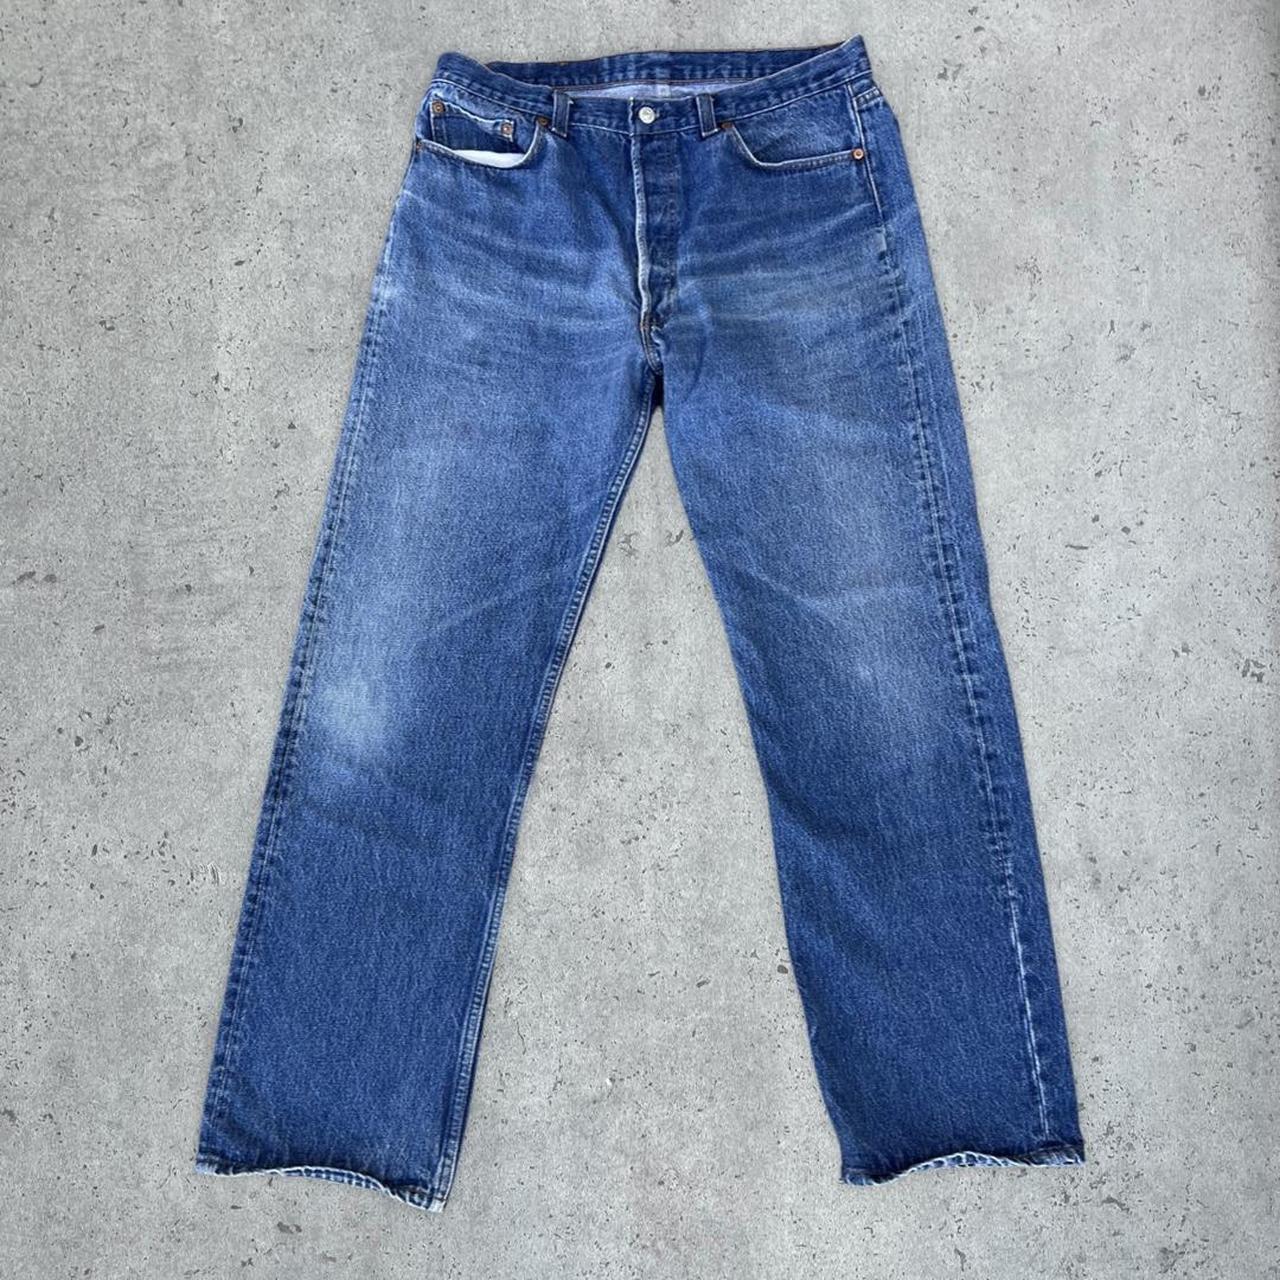 Levi's Men's Blue and Navy Jeans (2)